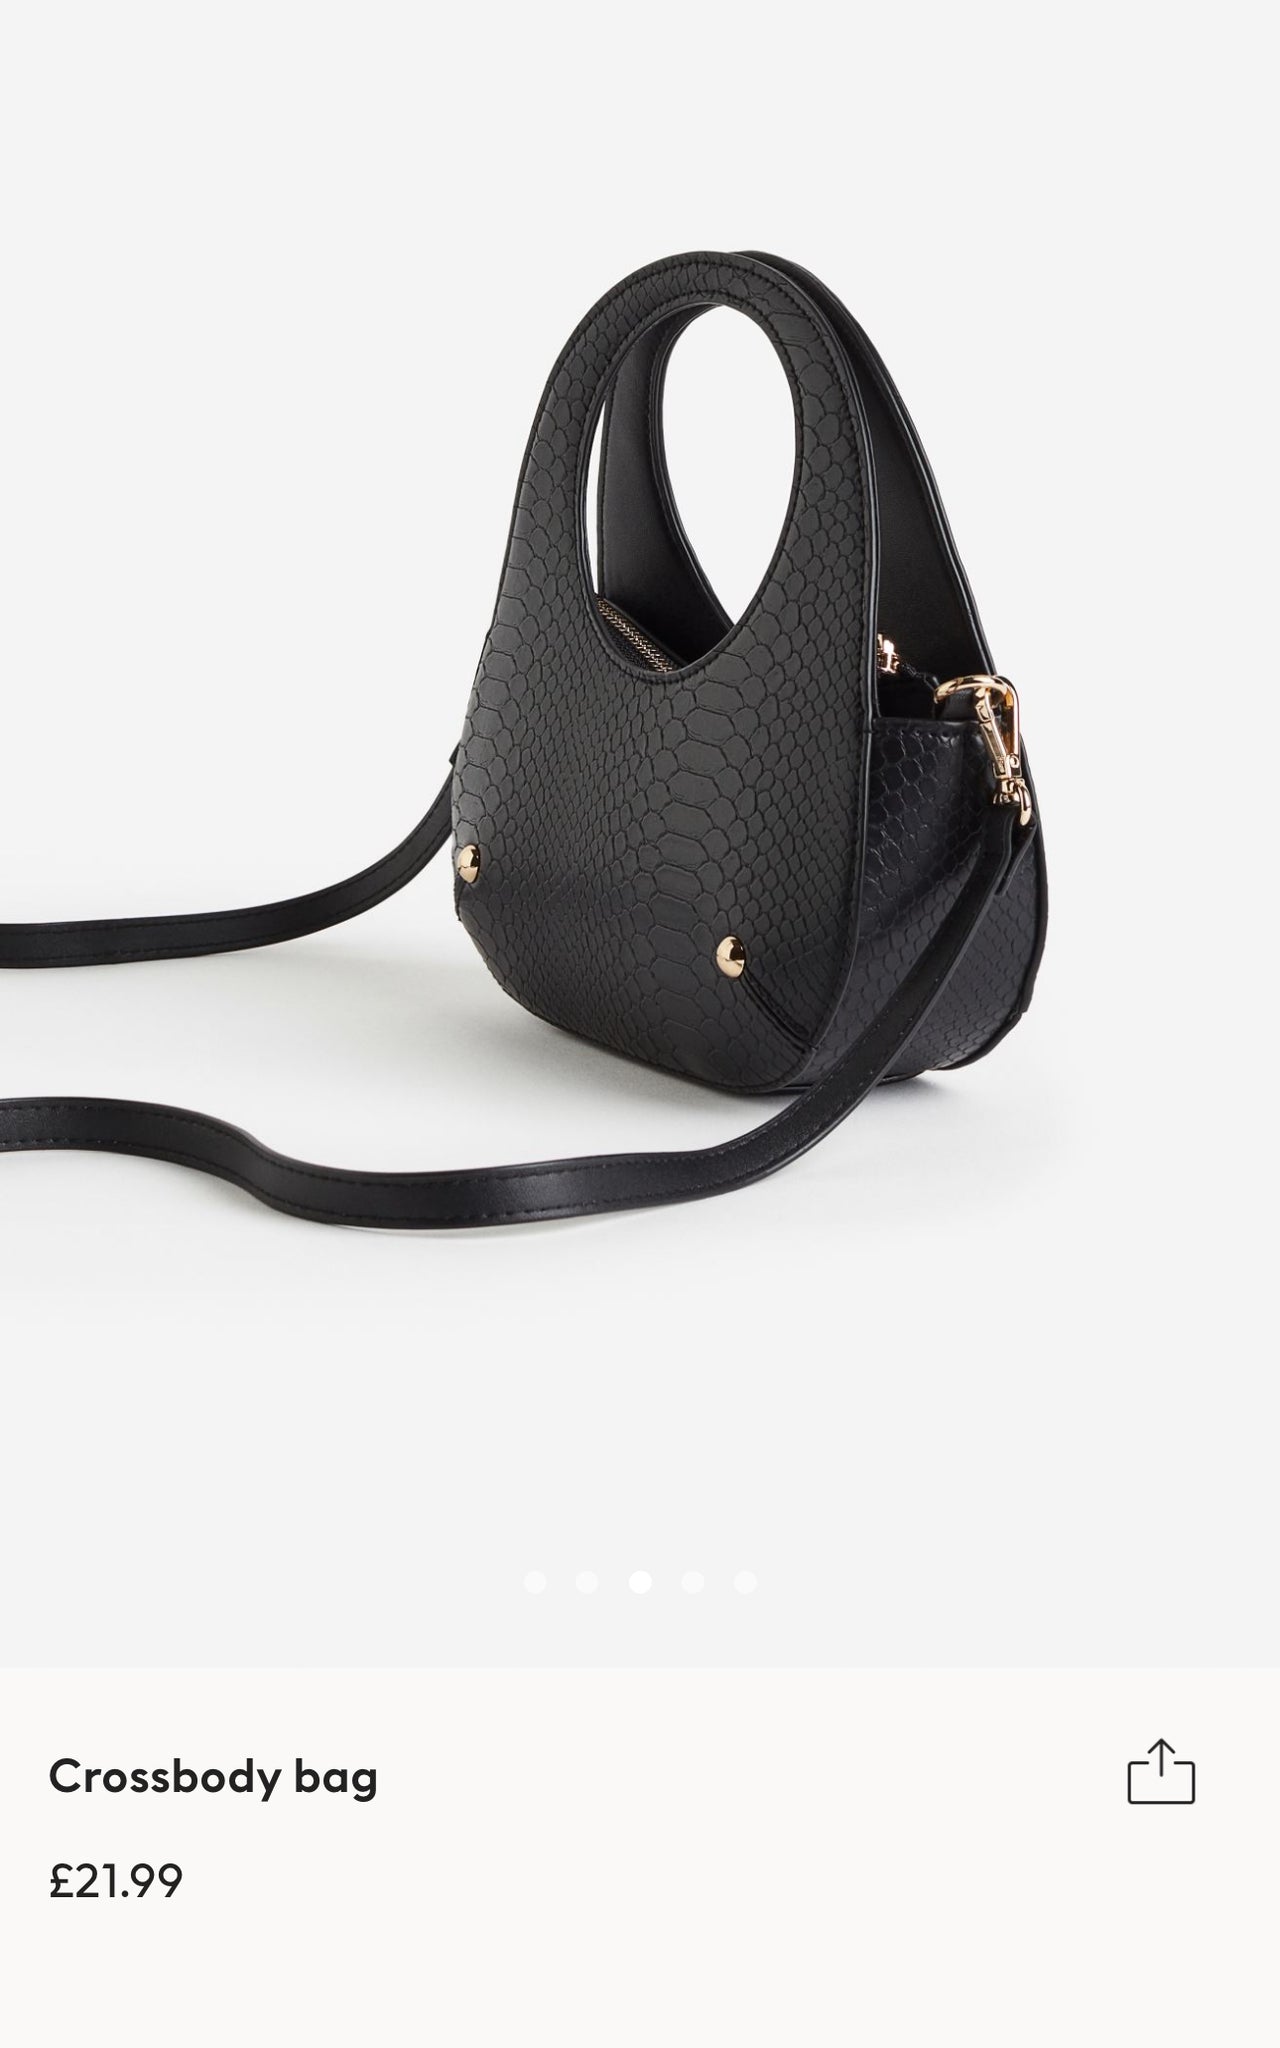 H&M Black Bag - New with Tags